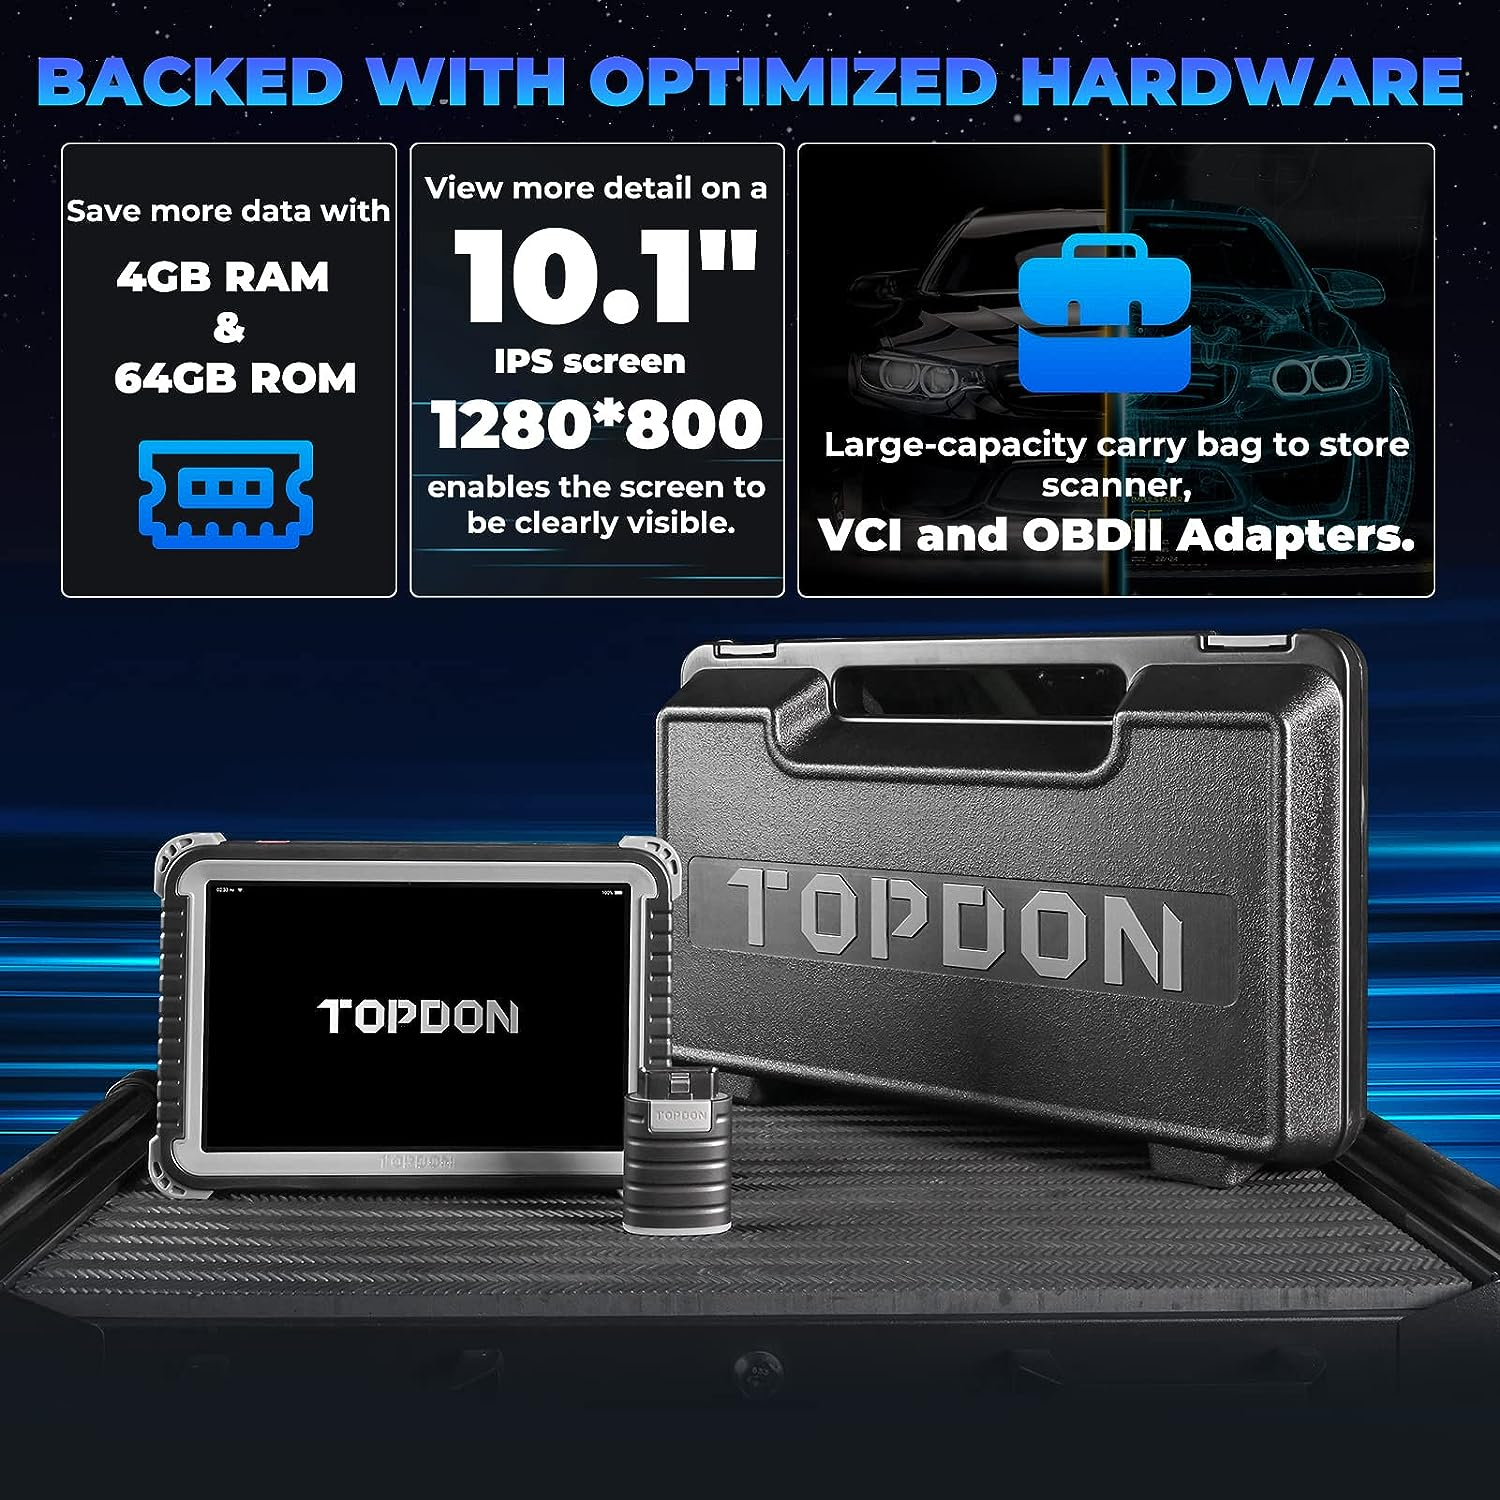 Topdon Phoenix Lite (2 Years Update) – TOPDON for Autointhebox